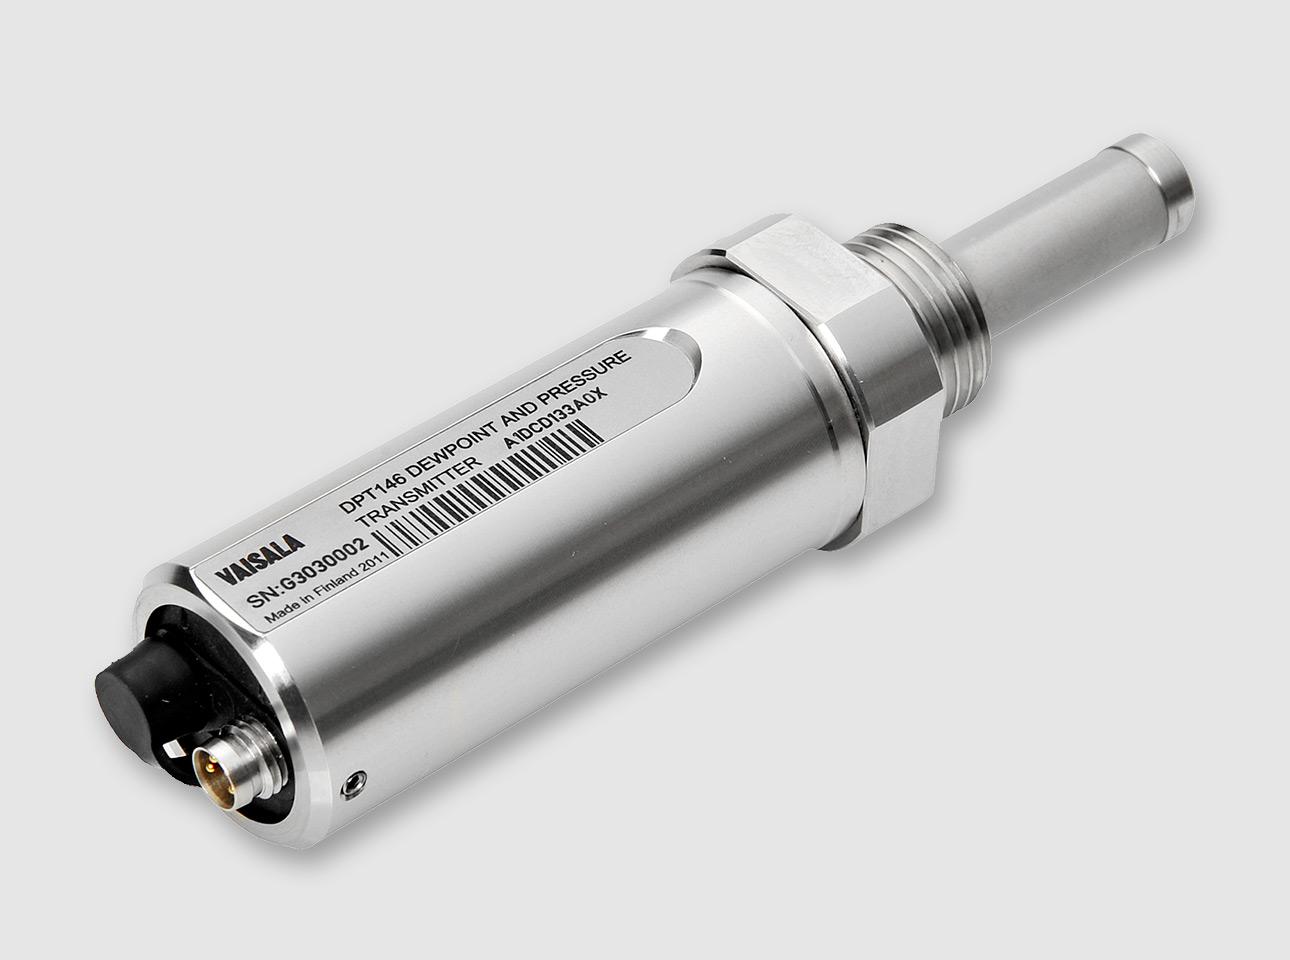 Vaisala’s DPT146 dewpoint sensor for compressed air measurement is a dew point detector that measures process pressure simultaneously.